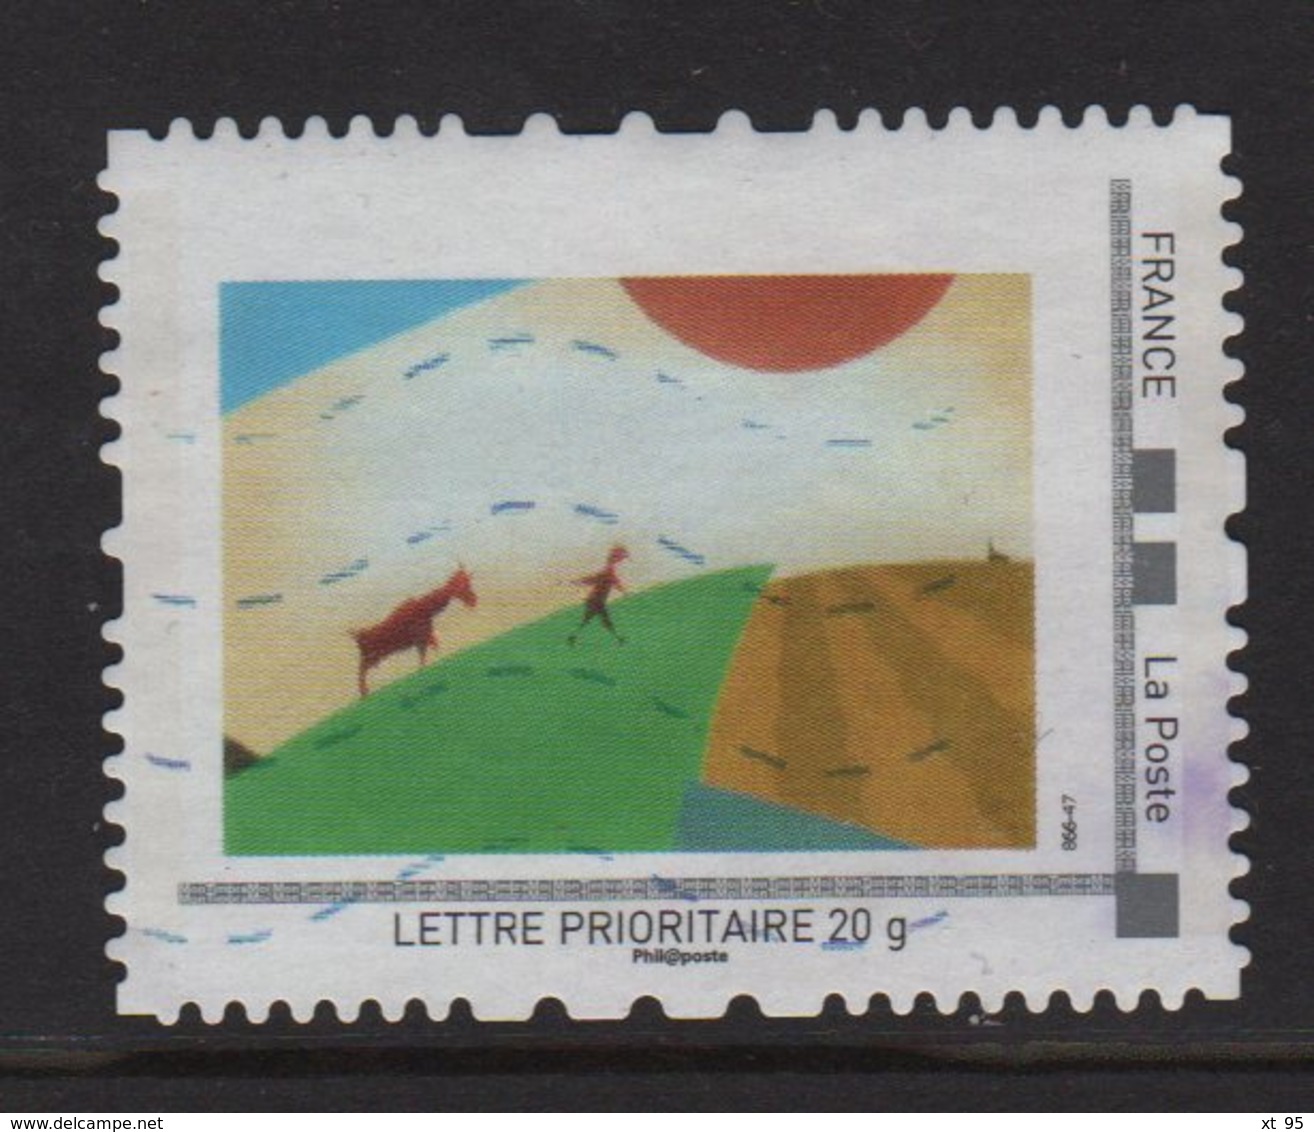 Timbre Personnalise Oblitere - Lettre Prioritaire - Dessin - Used Stamps